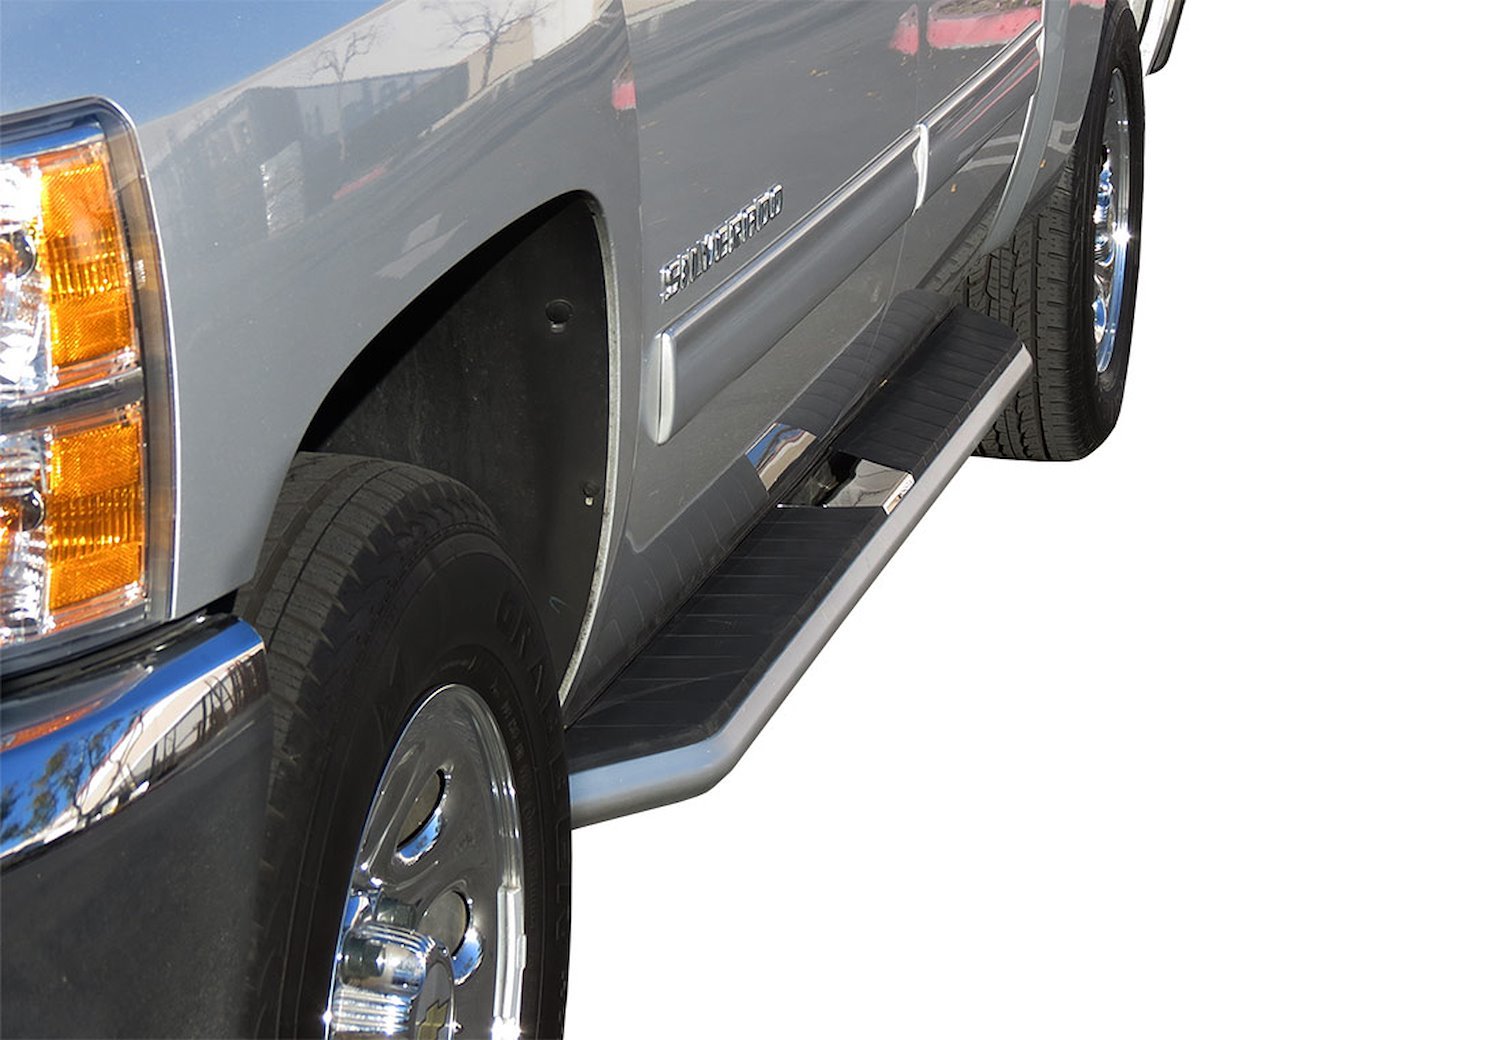 STX 300 Running Boards are designed with advanced PC technology. The 4.5? wide step platforms are de